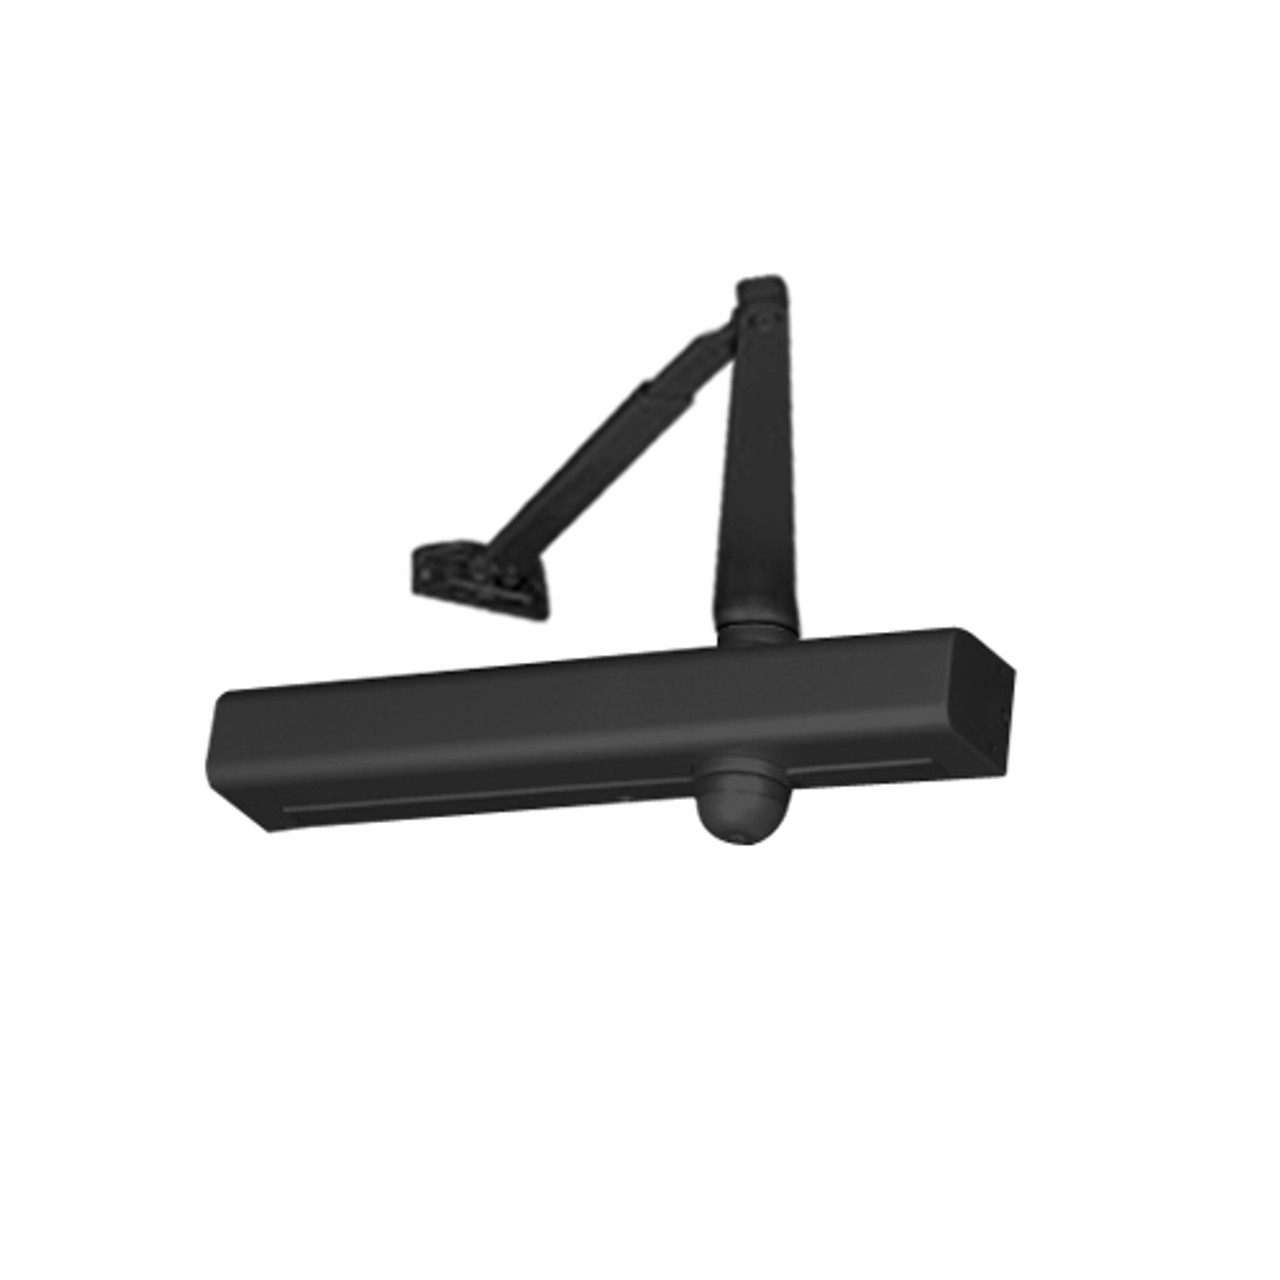 8381-693 Norton 8000 Series Non-Hold Open Door Closers with Regular Low Profile Arm in Black Finish